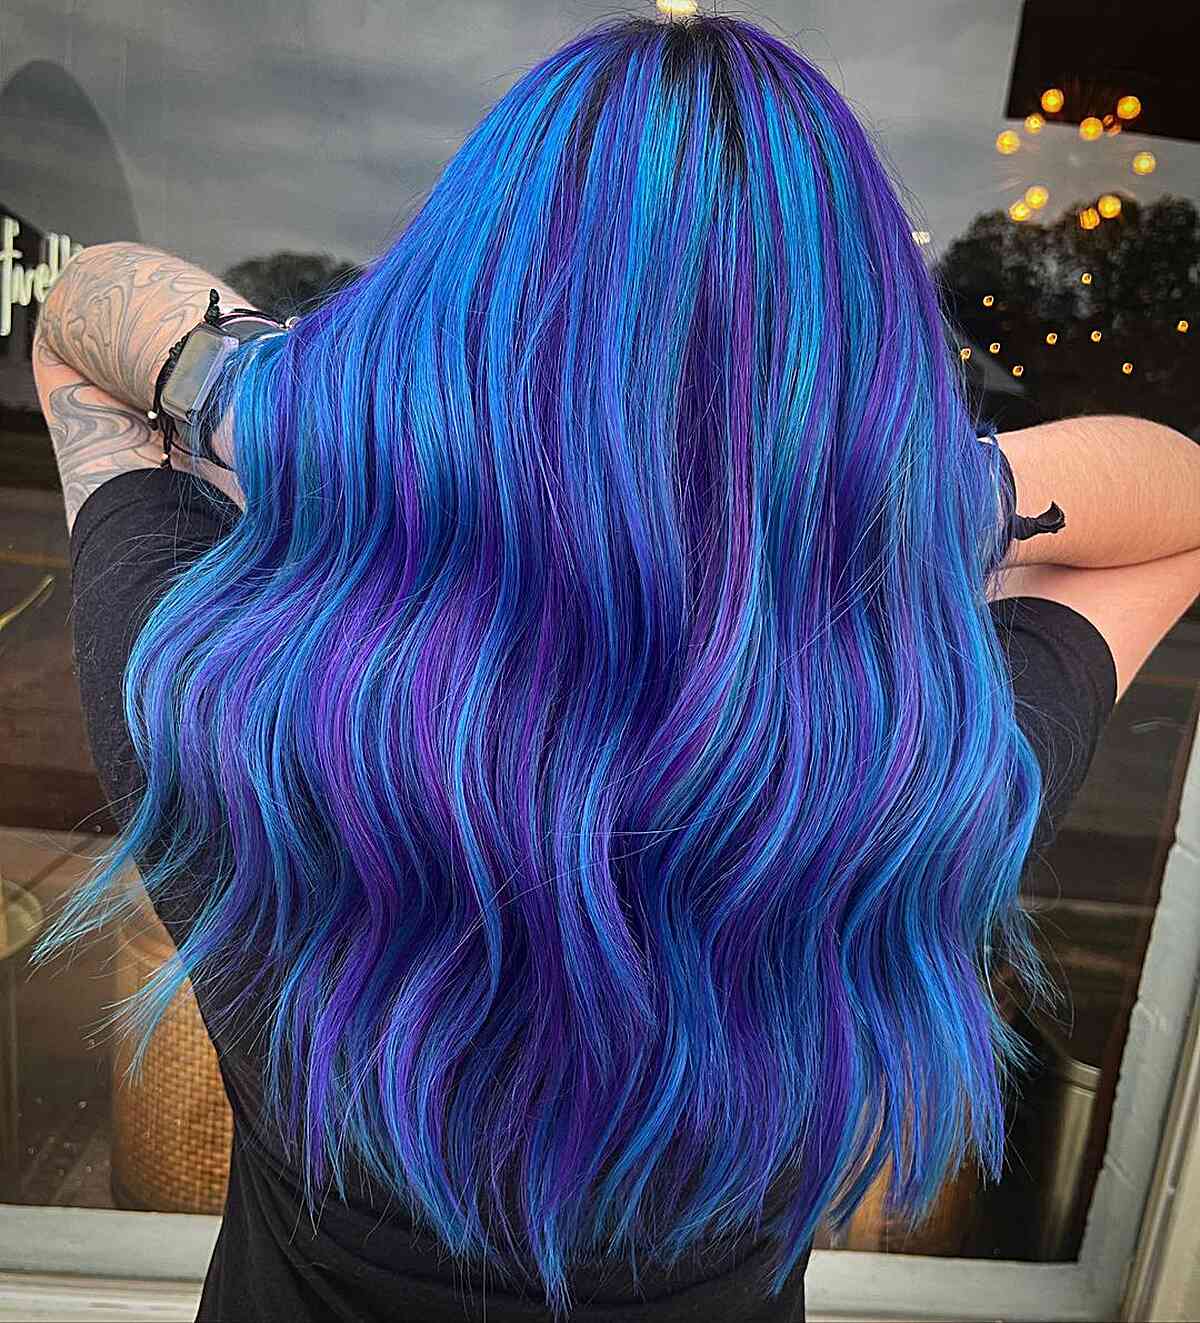 Amazing Blue and Purple Balayage Hair for ladies with long wavy tresses